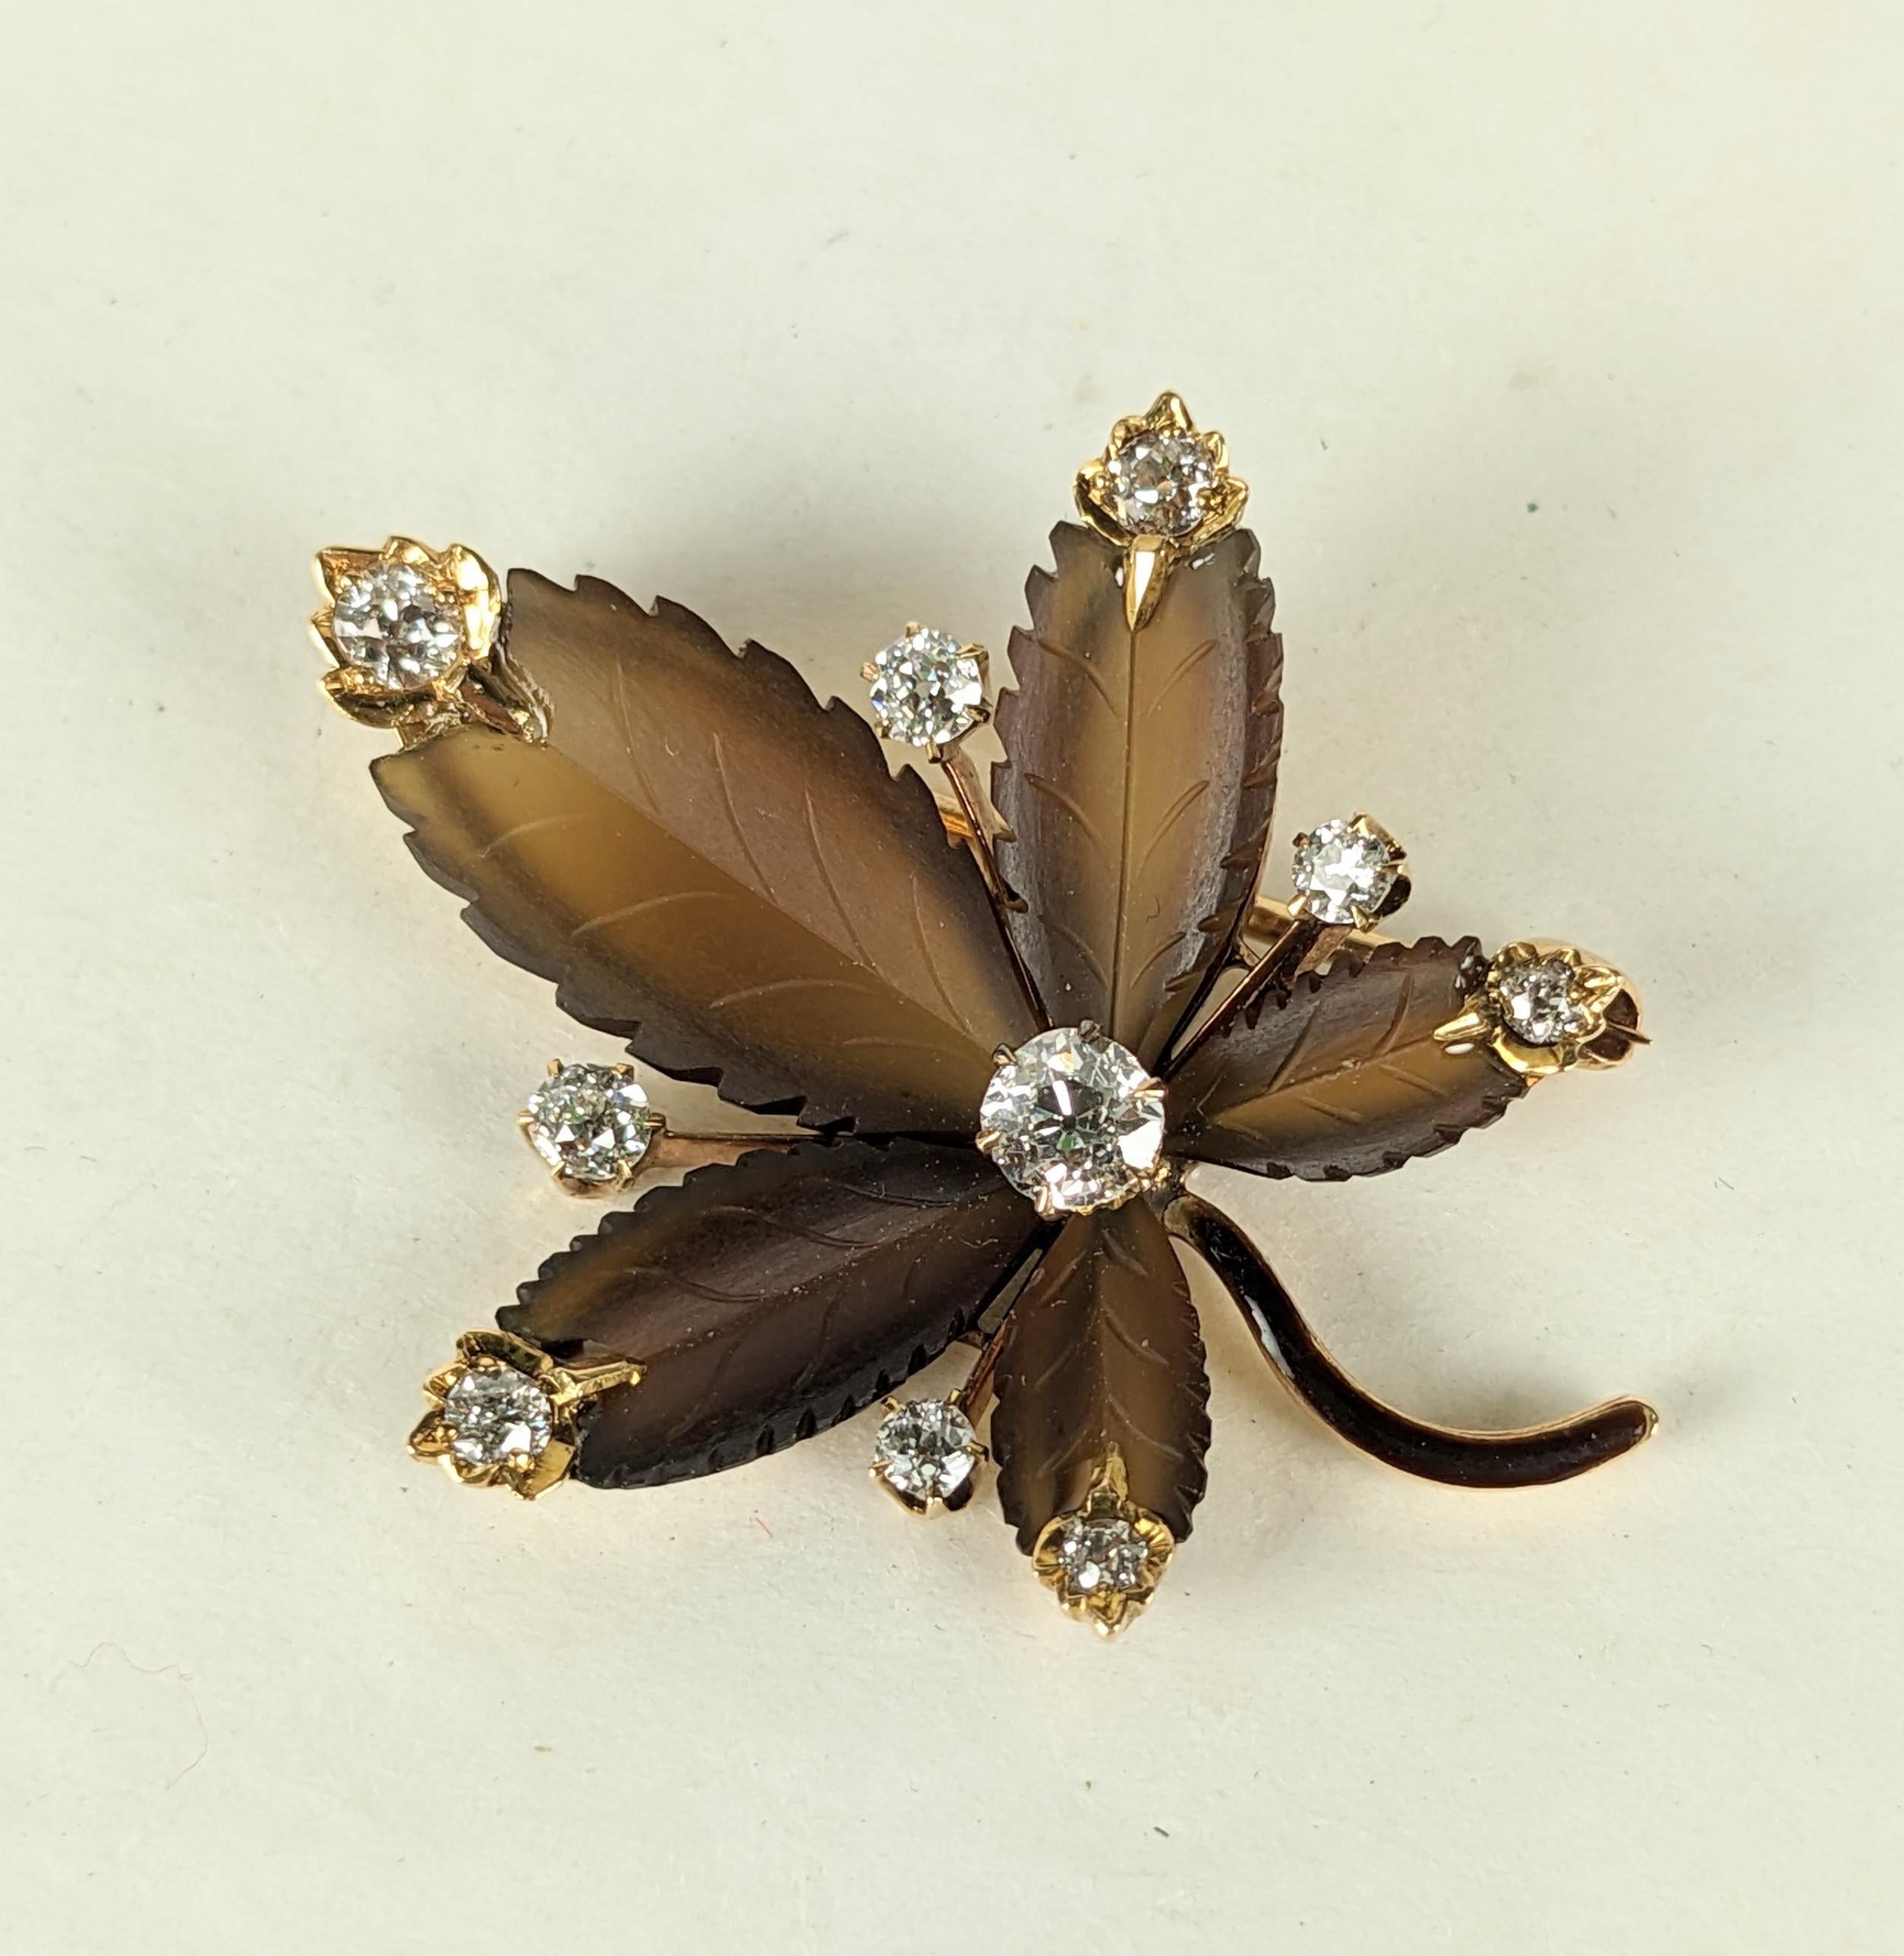 Victorian Carved Quartz and Diamond Leaf Brooch/Pendant  from the mid 19th Century. Exceptional quality manufacture with high quality mine cut diamonds which are used as accents with hand carved smokey topaz or quartz frosted leaves. Lapidary work